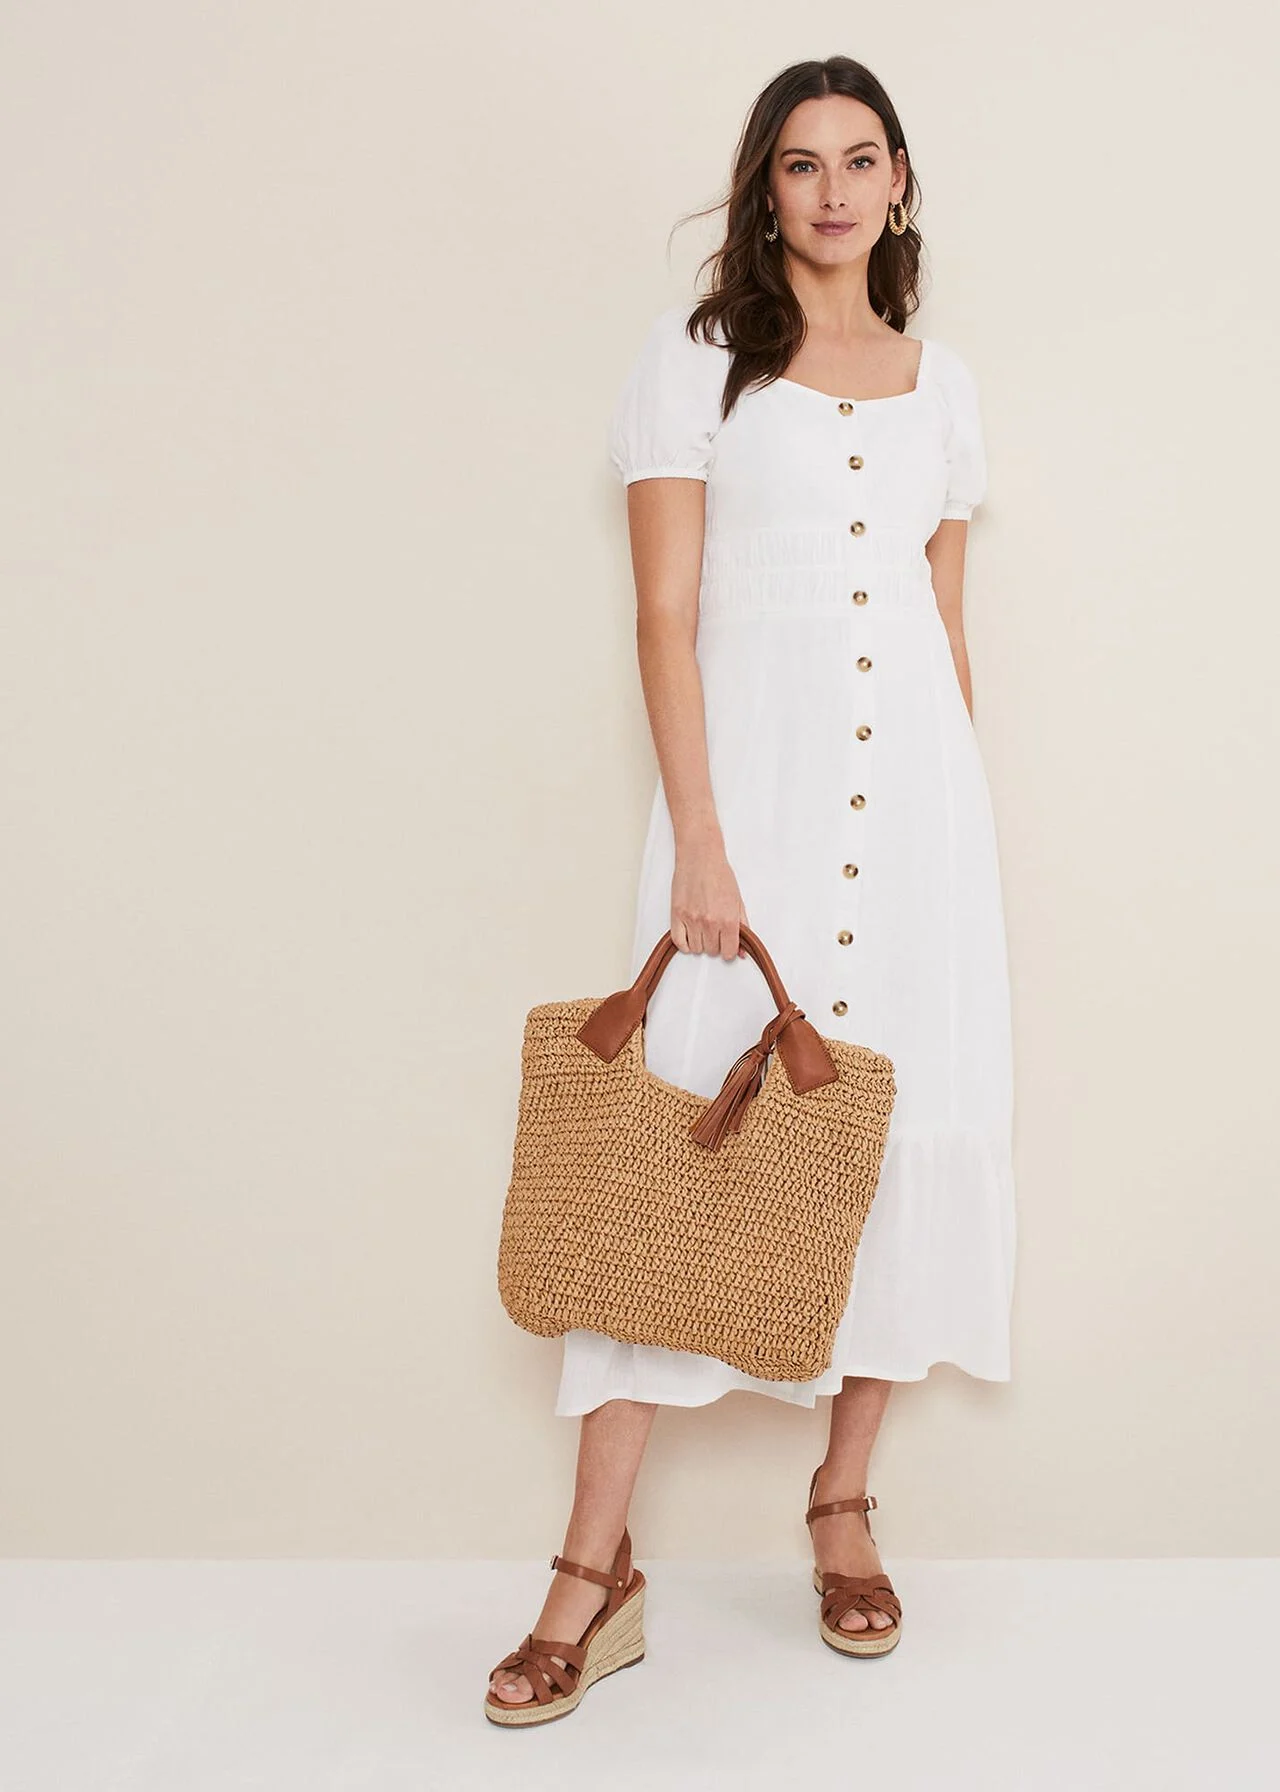 Discover the epitome of summer elegance with our guide to the best white summer dresses. From breezy linens to elegant midi styles, find a perfect dress for any occasion, ensuring comfort and chic all season long. White Summer Dress | White Summer Dresses | Summer Dress | White Summer Dress Long | White Summer Dresses Long | White Dress | Sundress | Beach Dress | White Outfit | Casual Dress | Sun Dress | White Mini Dress | Boho Dress | Sundress | Cute Dress | Long Dress | Vacation | Short Dress